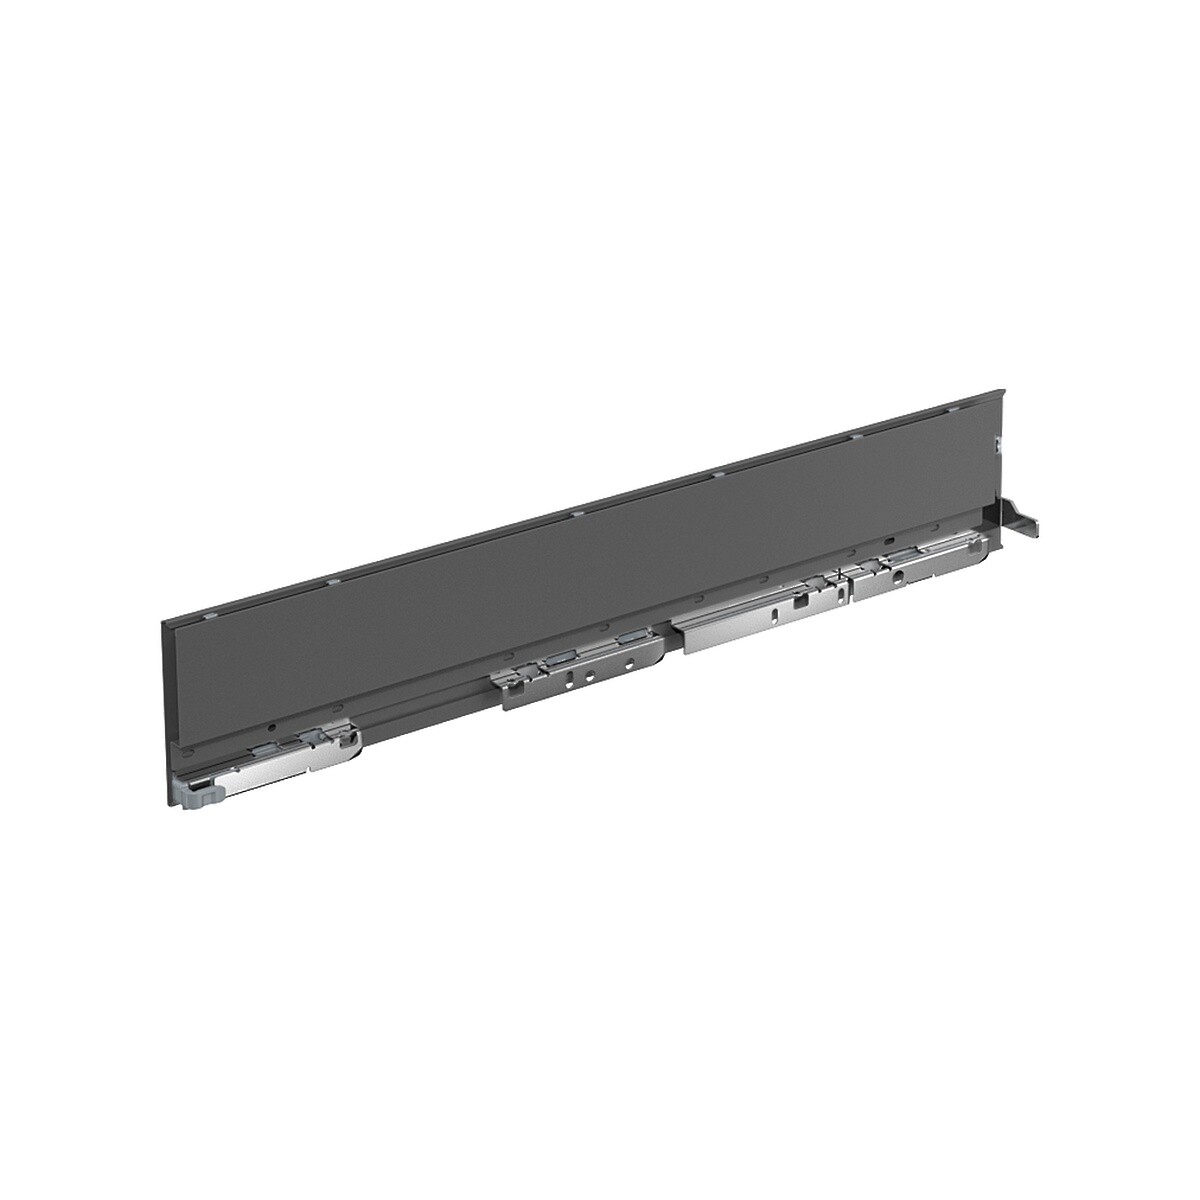 AvanTech YOU Drawer side profile, height 101 mm x NL 400 mm, Anthracite, Left